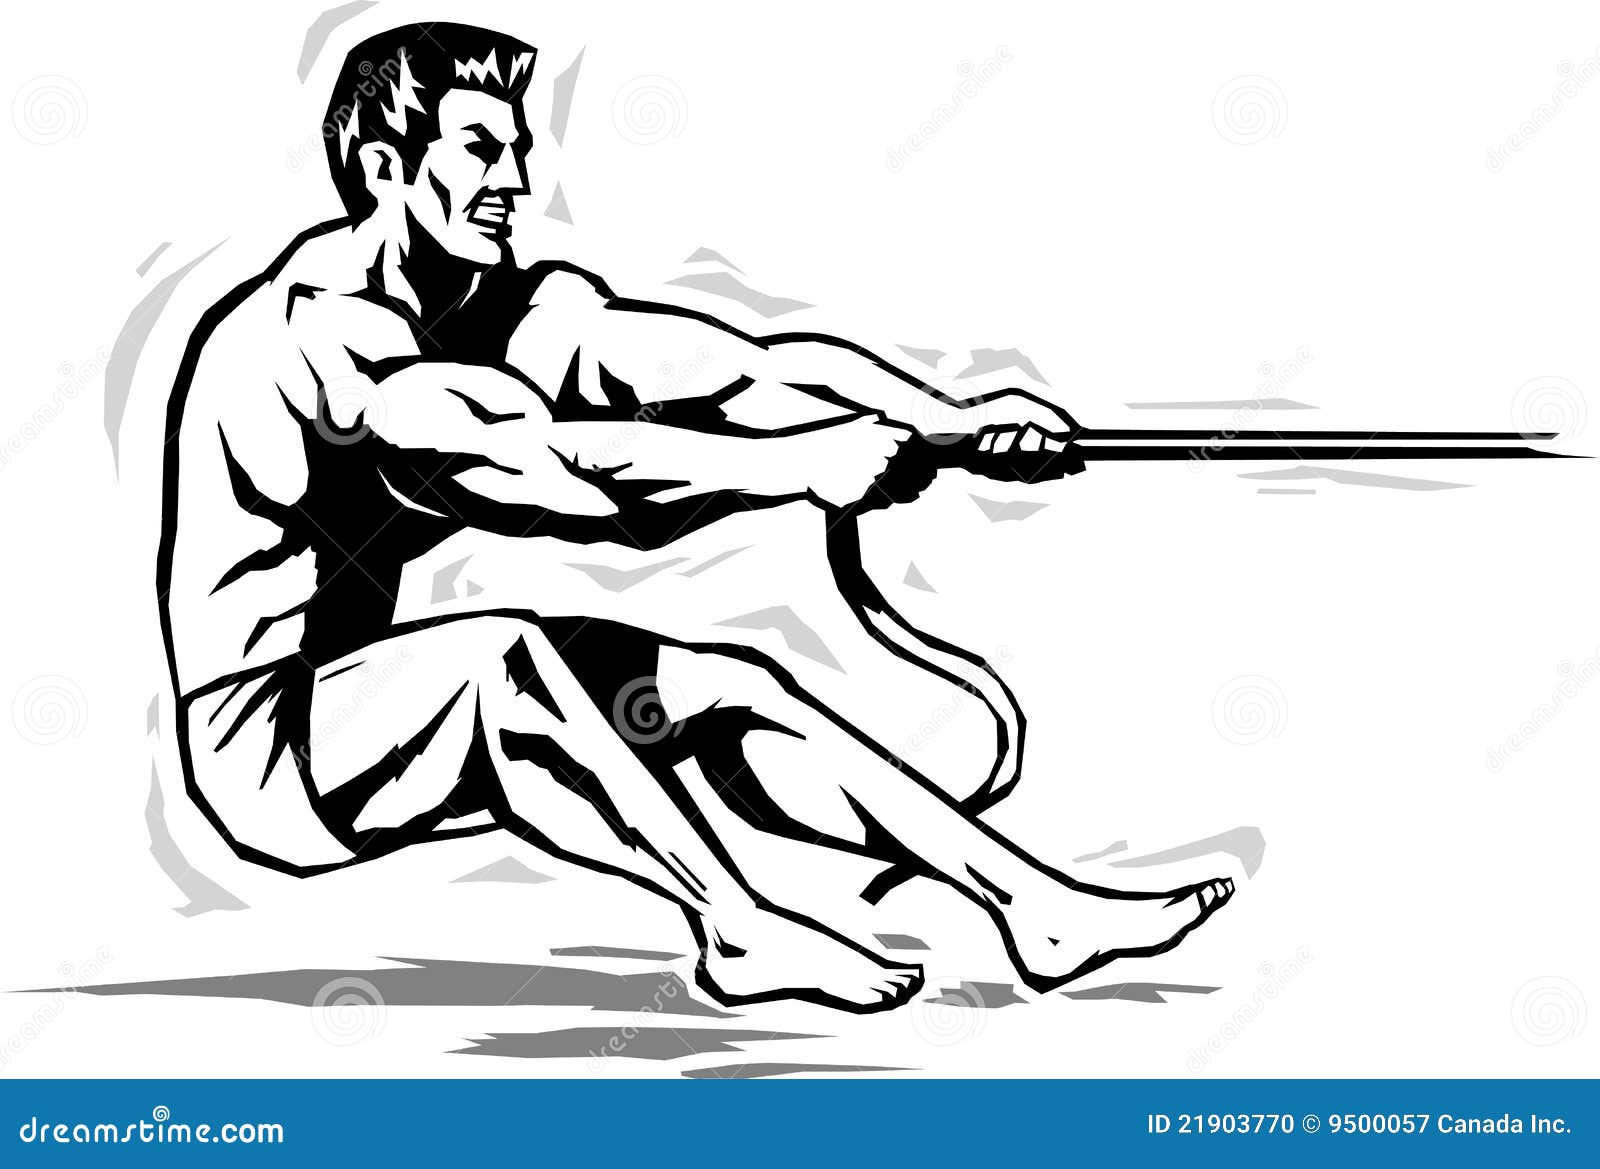 Strongman pulling rope stock vector. Illustration of tugging - 21903770